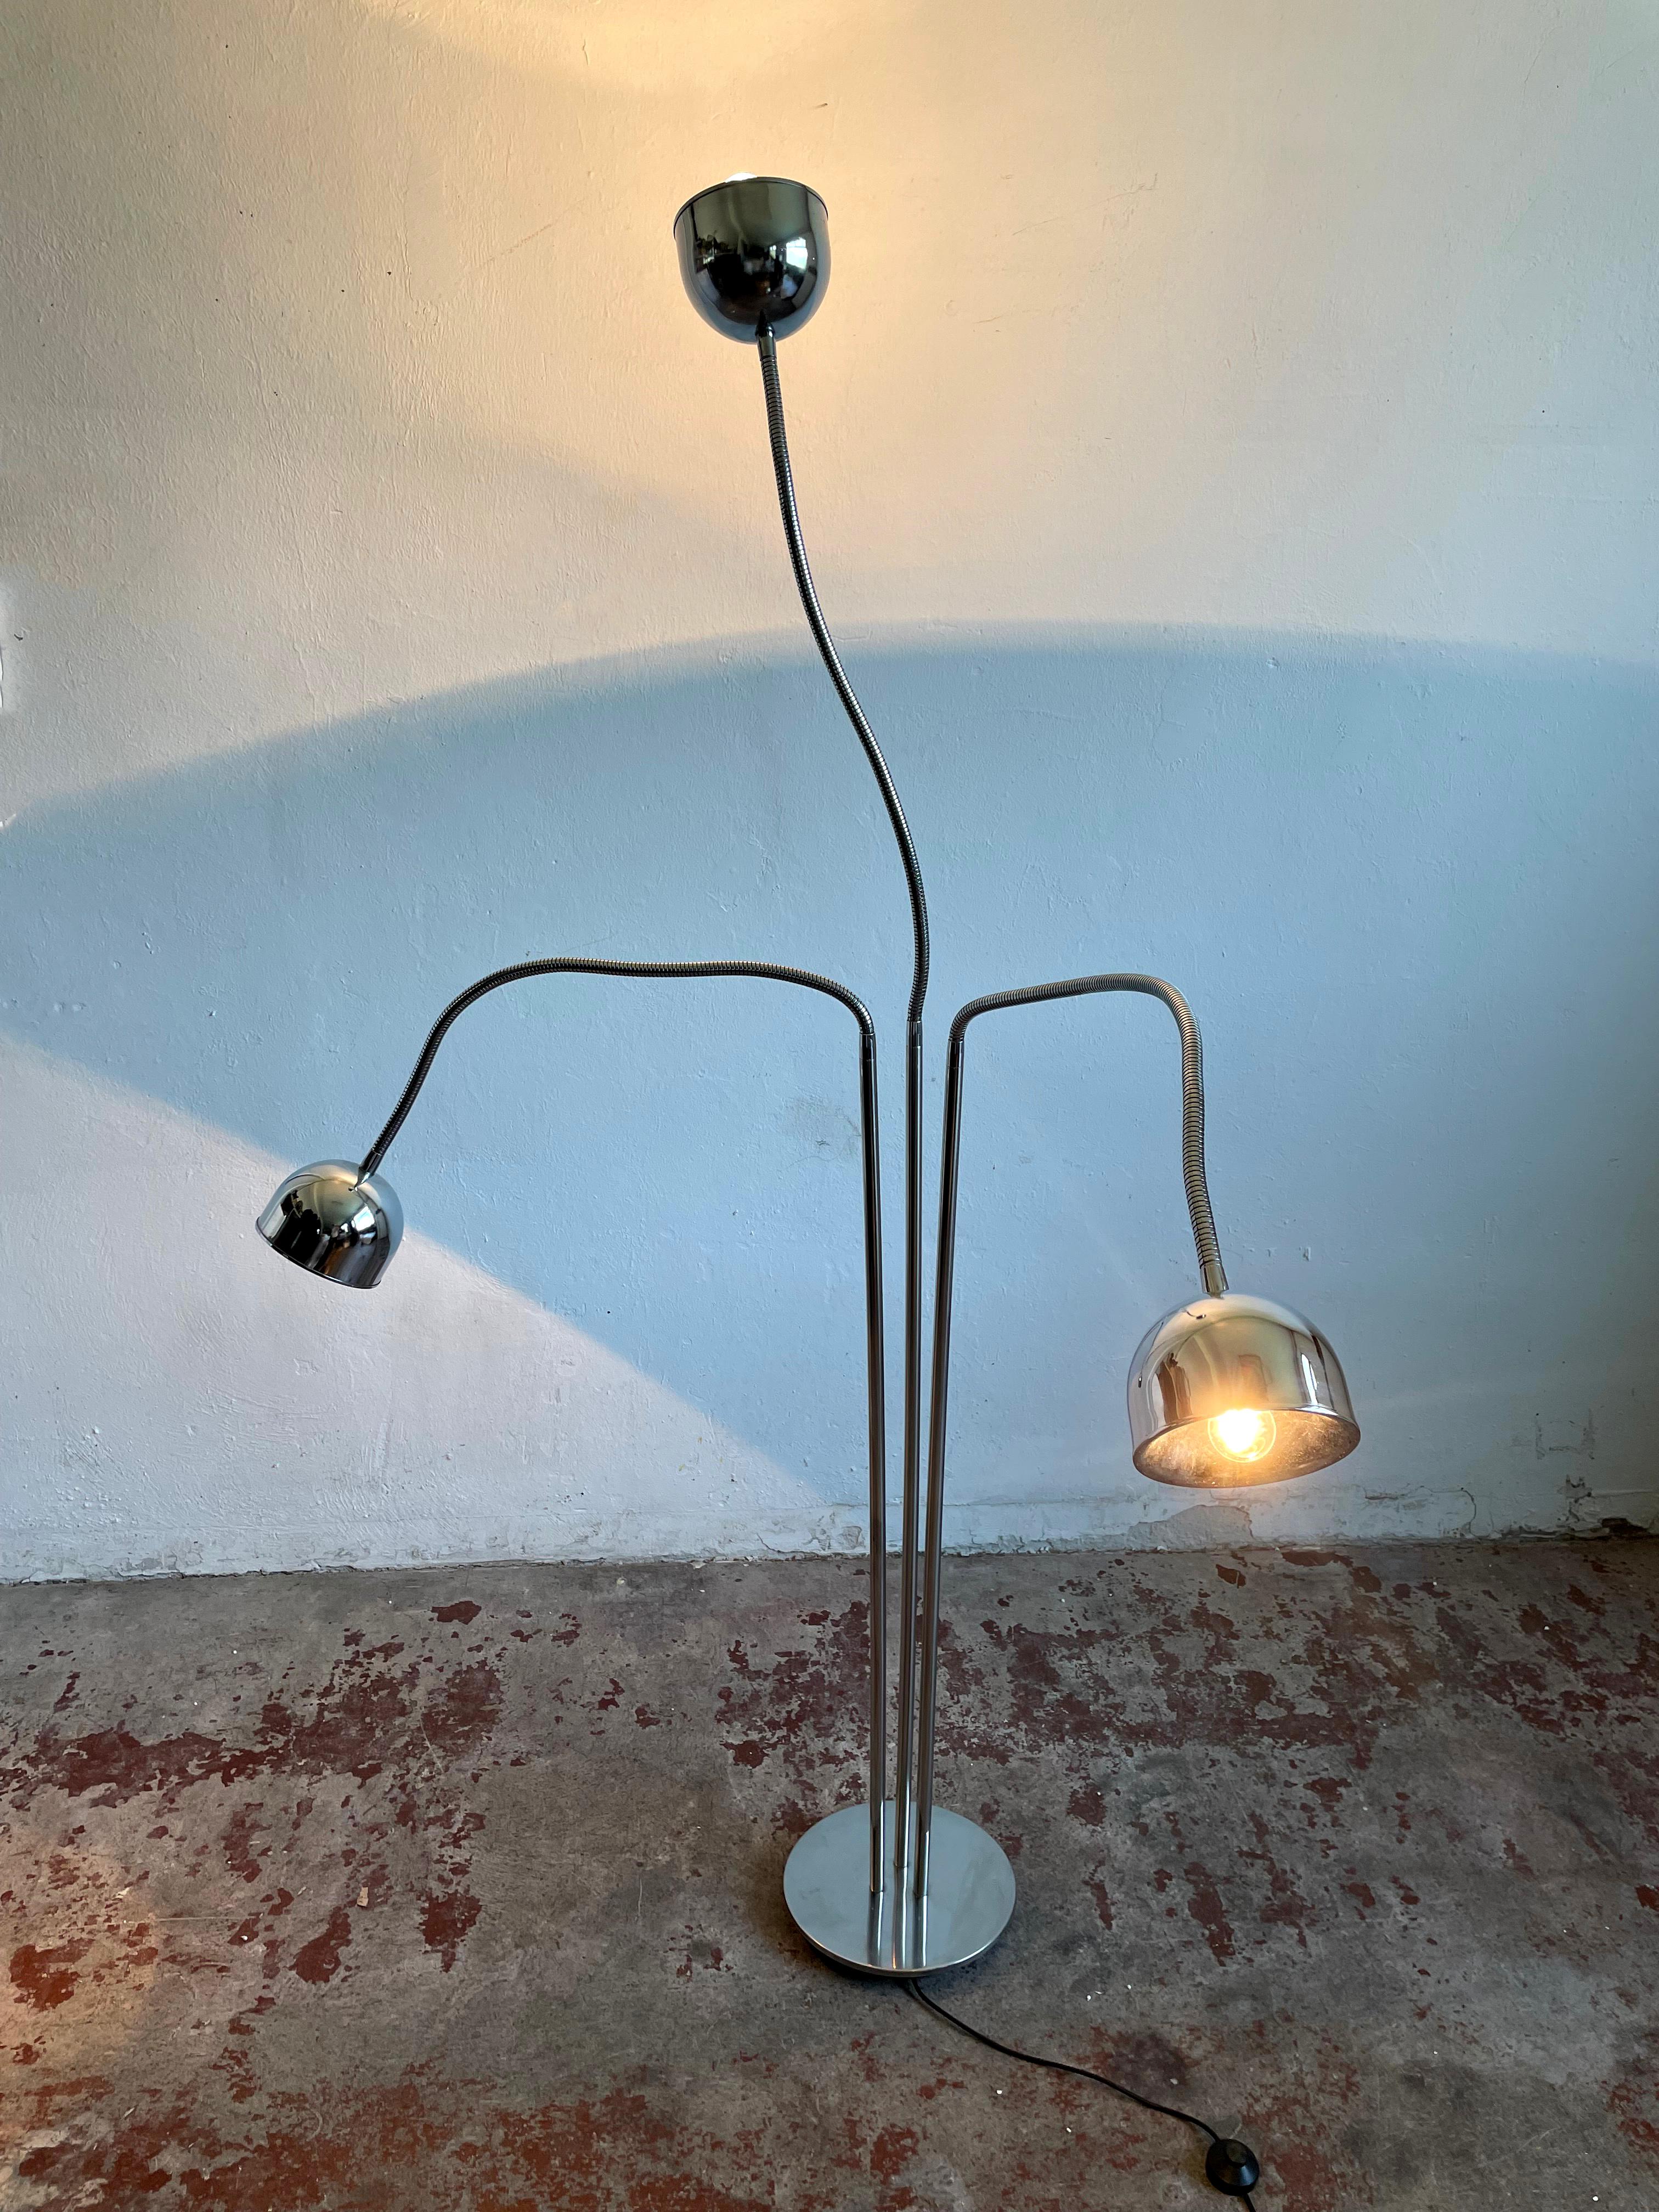 Vintage Italian Chrome Floor Lamp in style of Reggiani, Space Age Lamp, 1970s For Sale 8